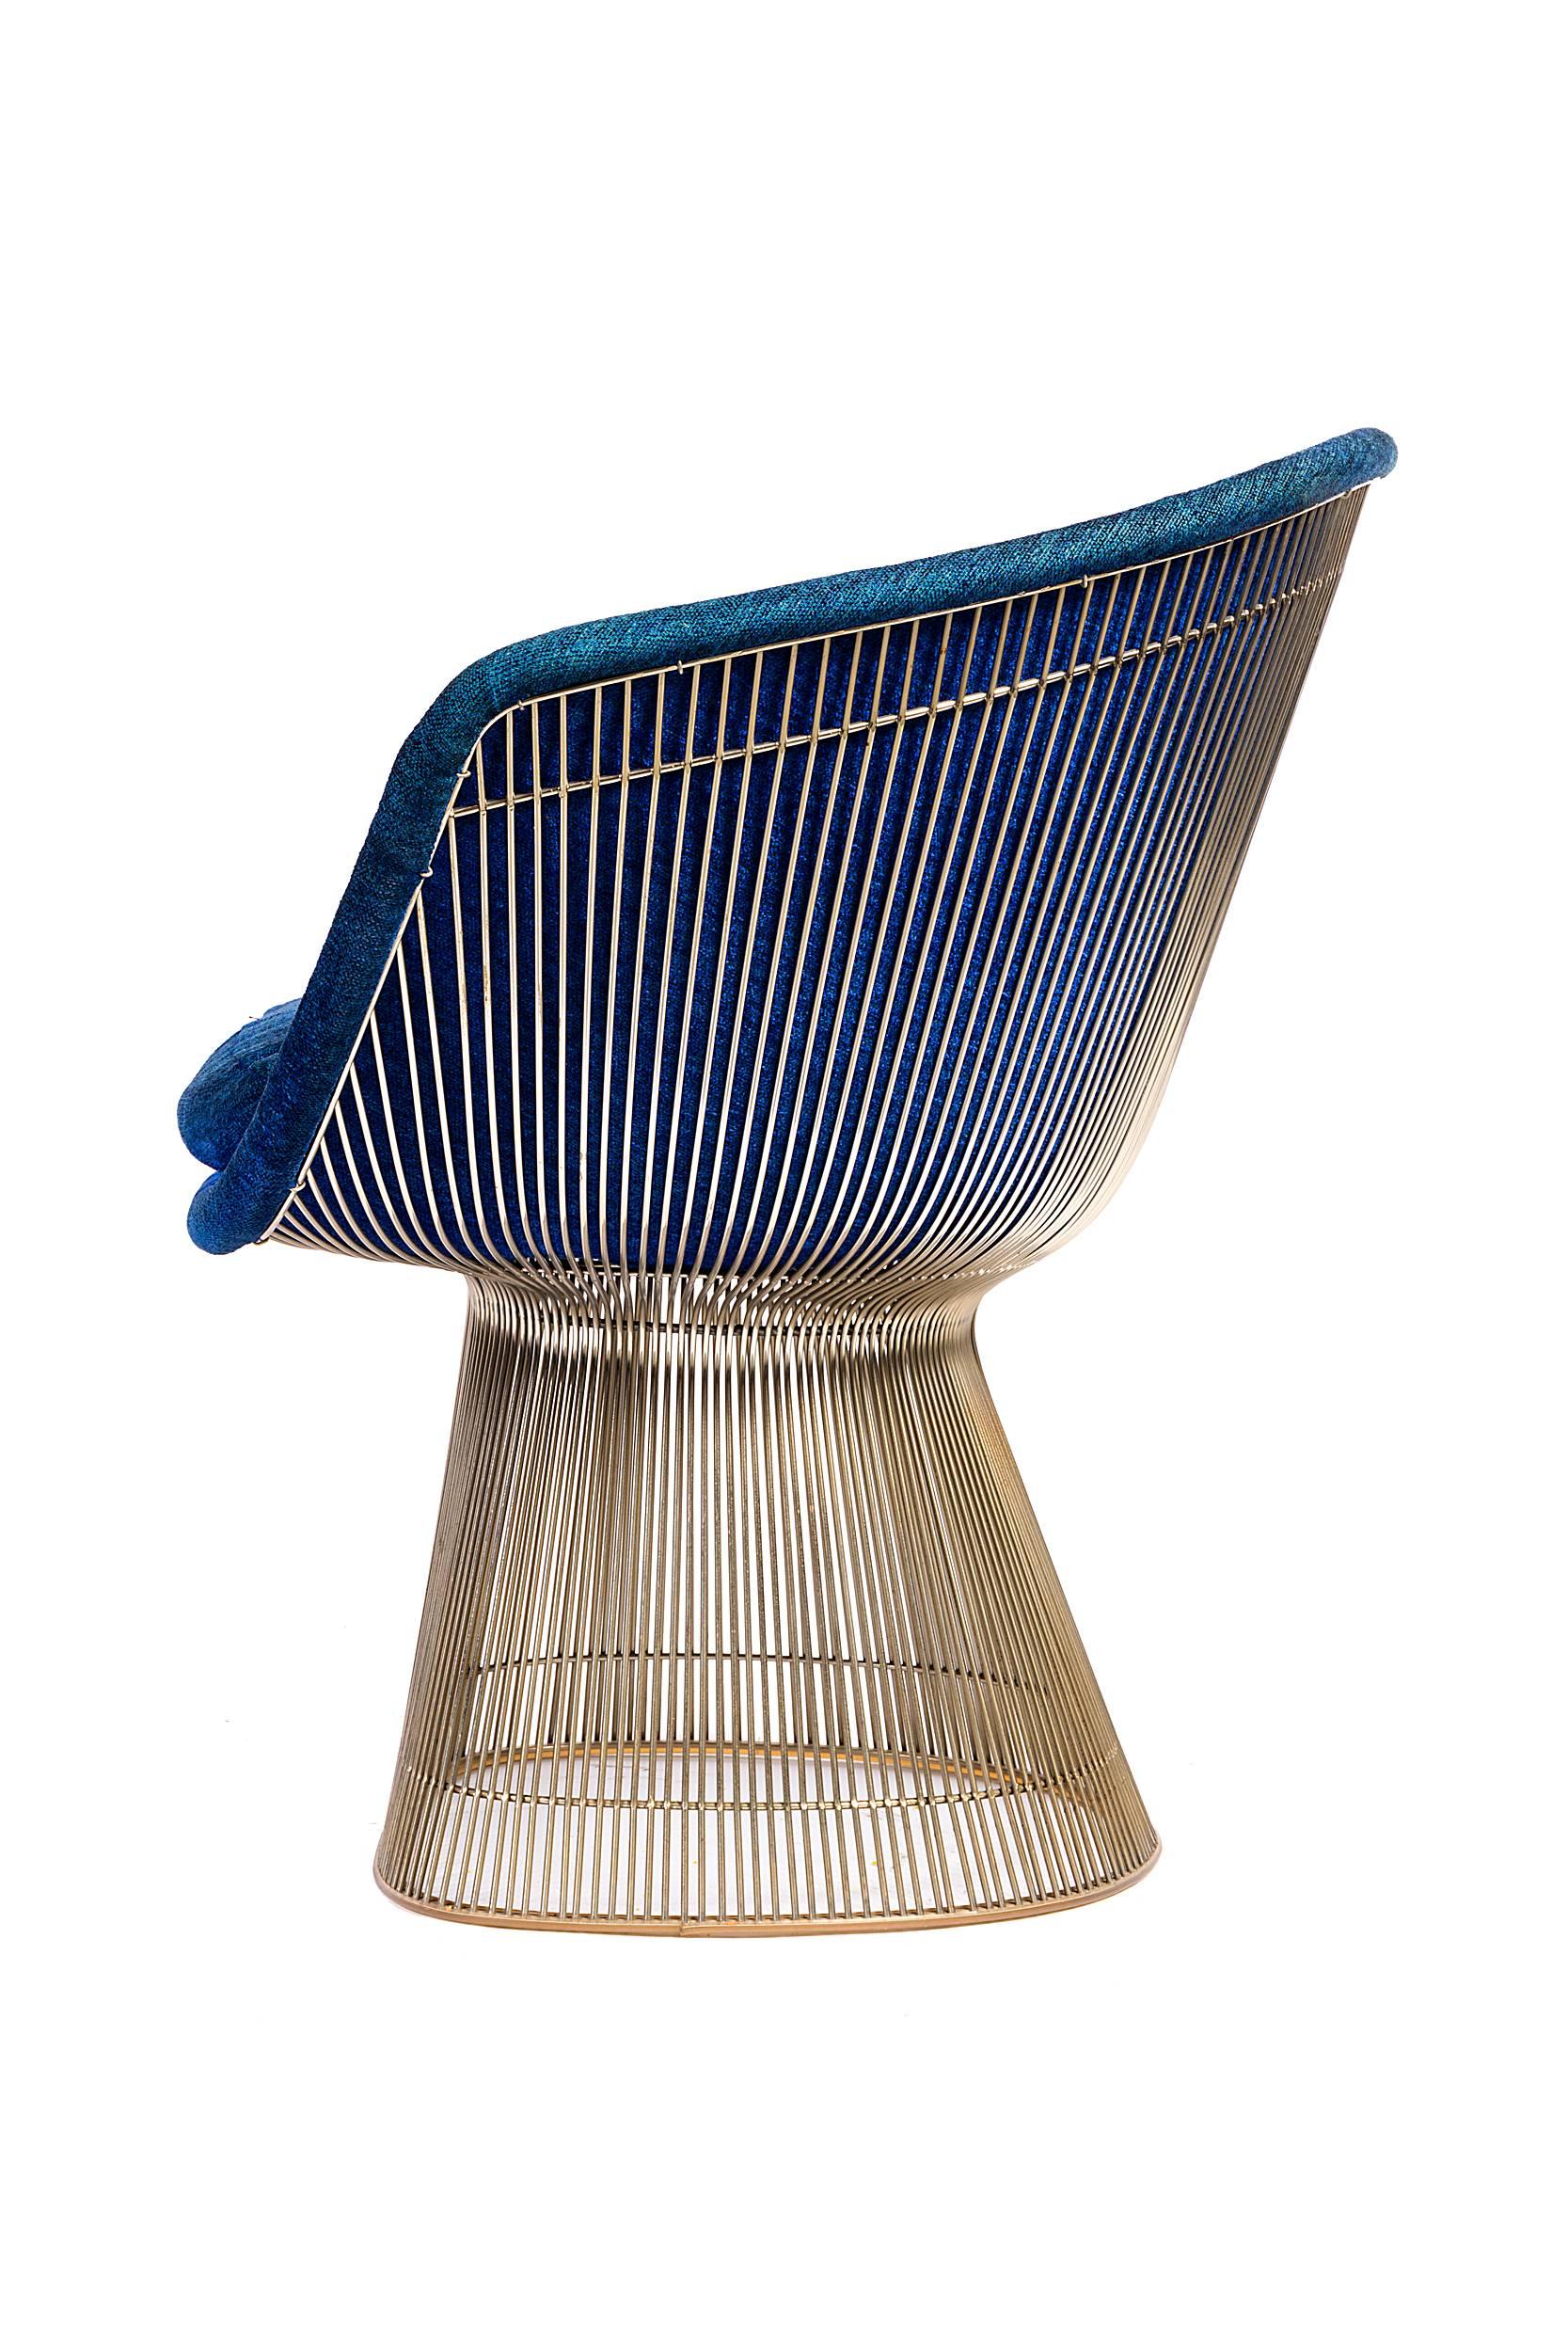 Mid-Century Modern Warren Platner Lounge Chairs for Knoll in Original Fabric, USA, 1960s